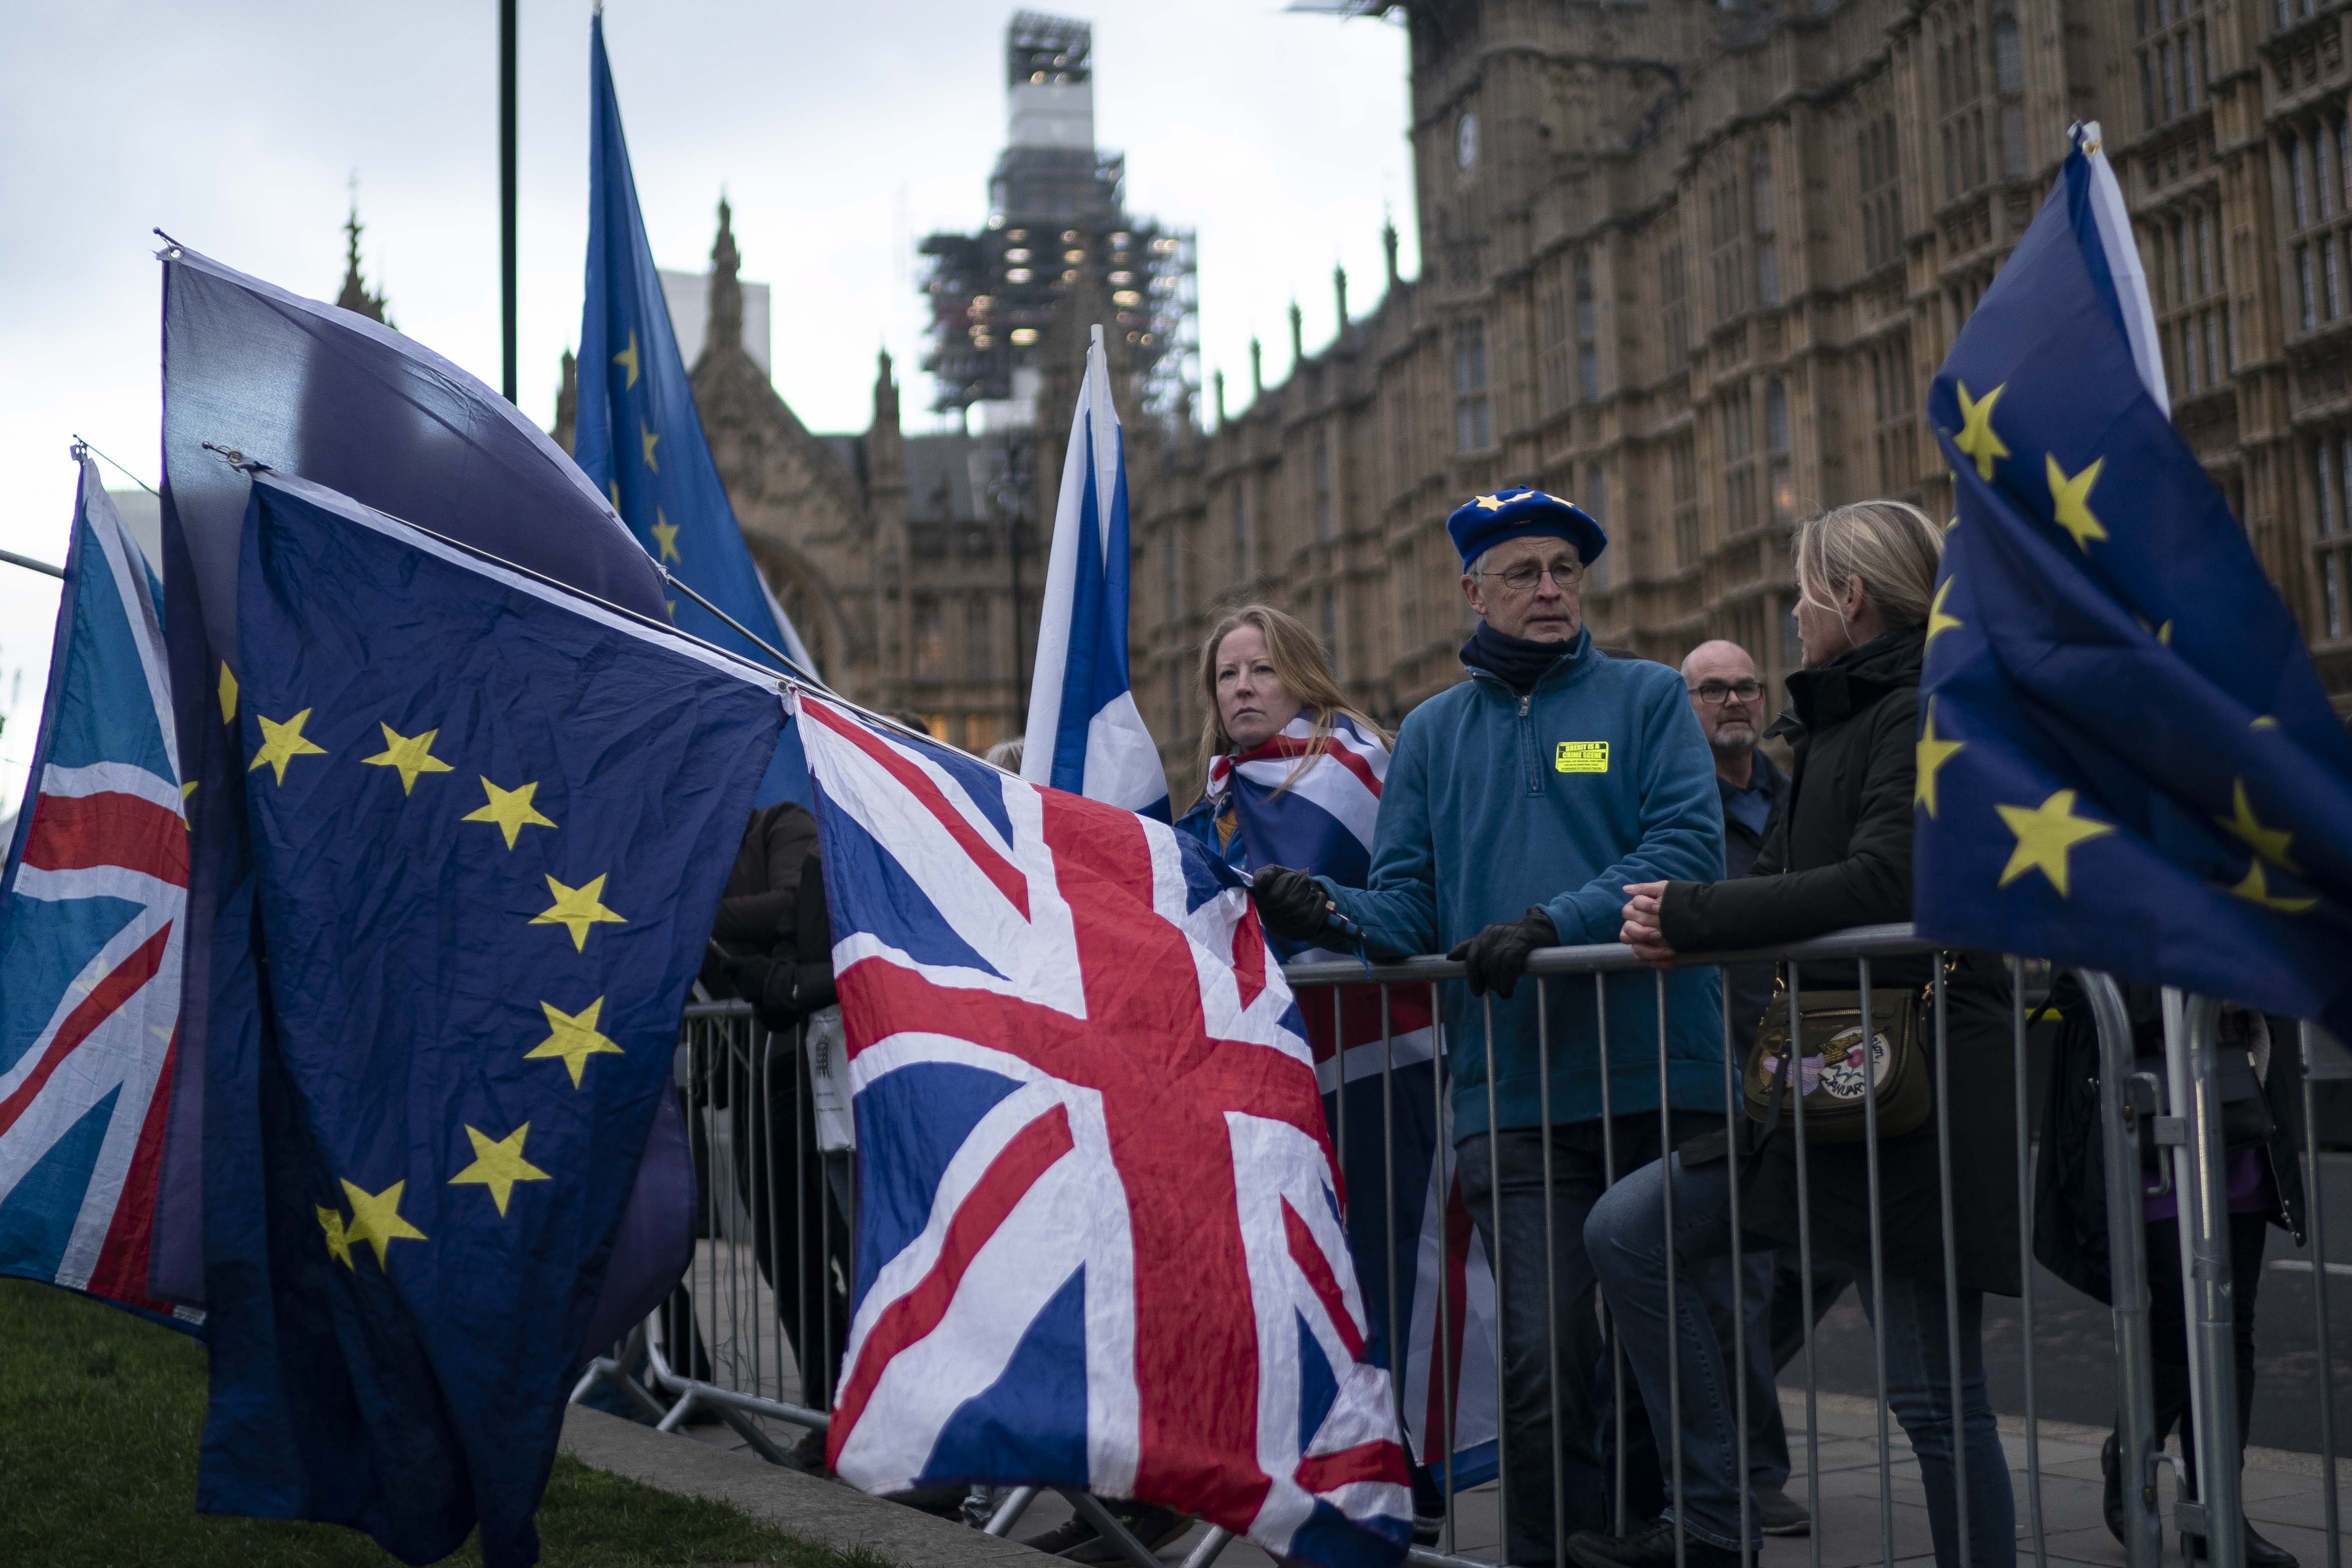 Brexit backers and opponents gather outside the Houses of Parliament in London on January 14. Ahead of the failed Brexit vote on Tuesday, Prime Minister Theresa May warned that the UK’s withdrawal from the EU may not happen at all if the plan were rejected, thus undermining faith in the democratic process. Photo: EPA-EFE